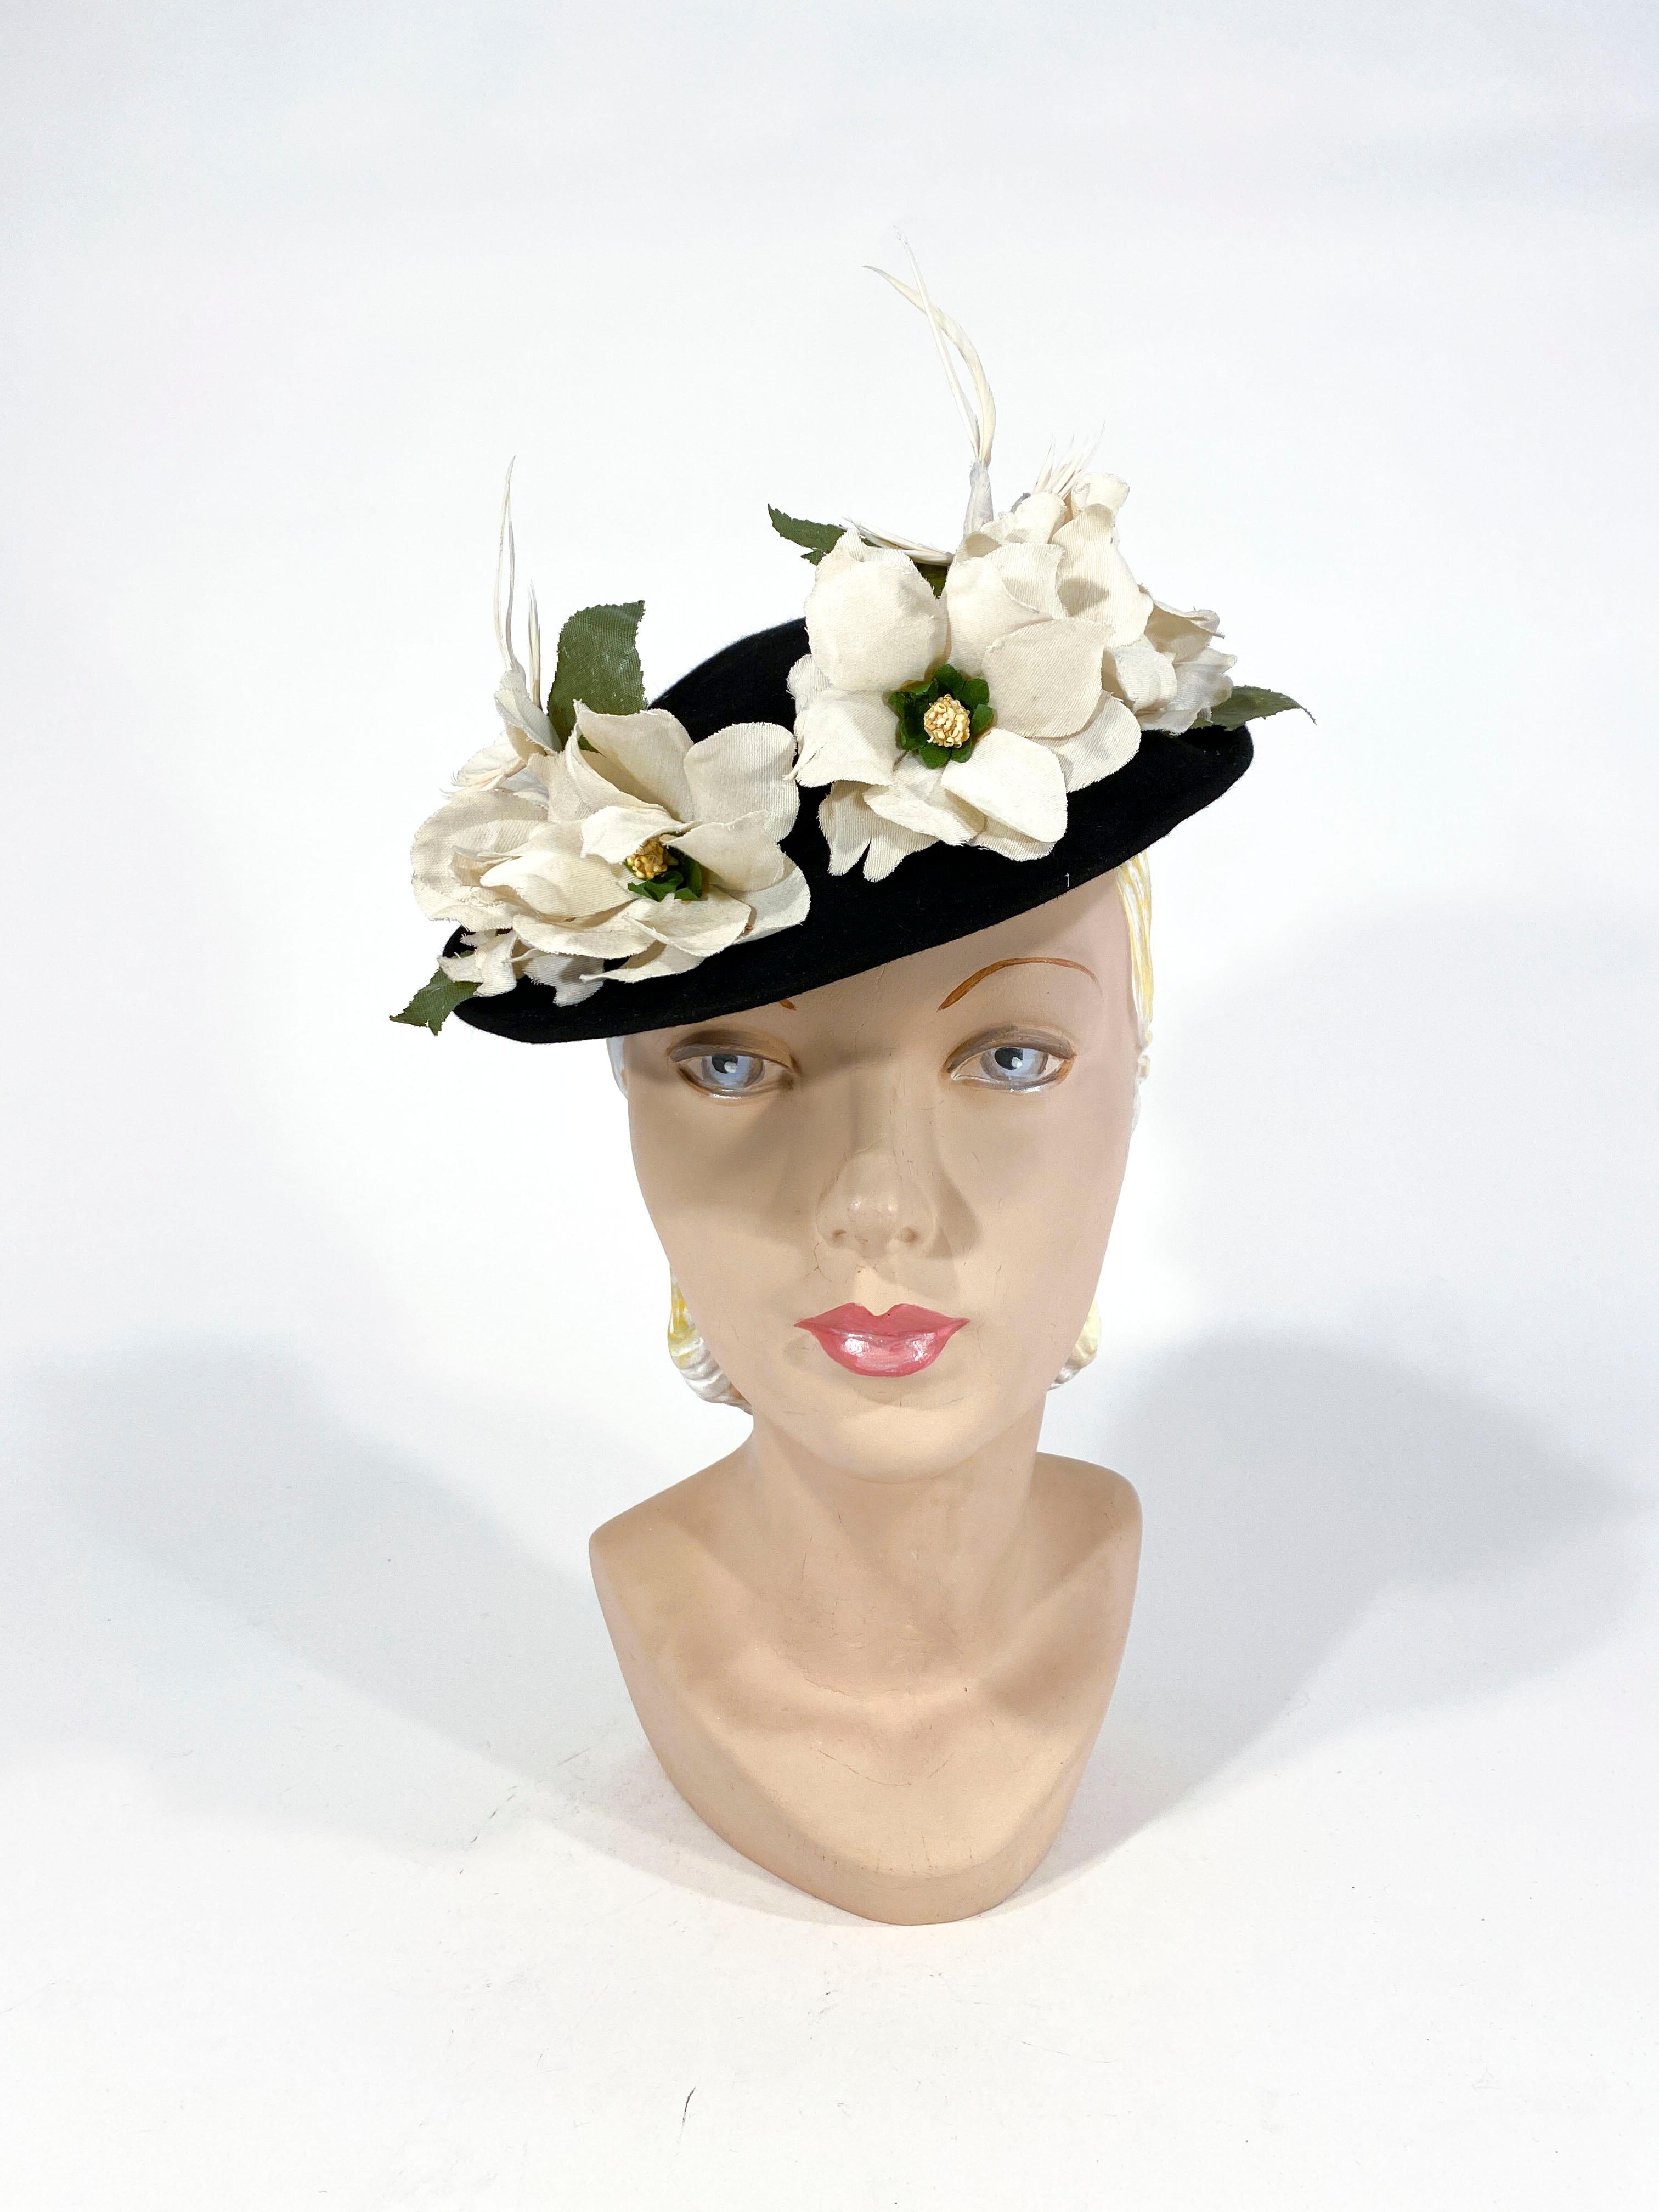 1940s black beaver fur felt toy hat decorated with handmade linen flowers, oil cloth leaves, and white feathers birds on each side. The interior has a security strap attached to secure the hat to the head. 